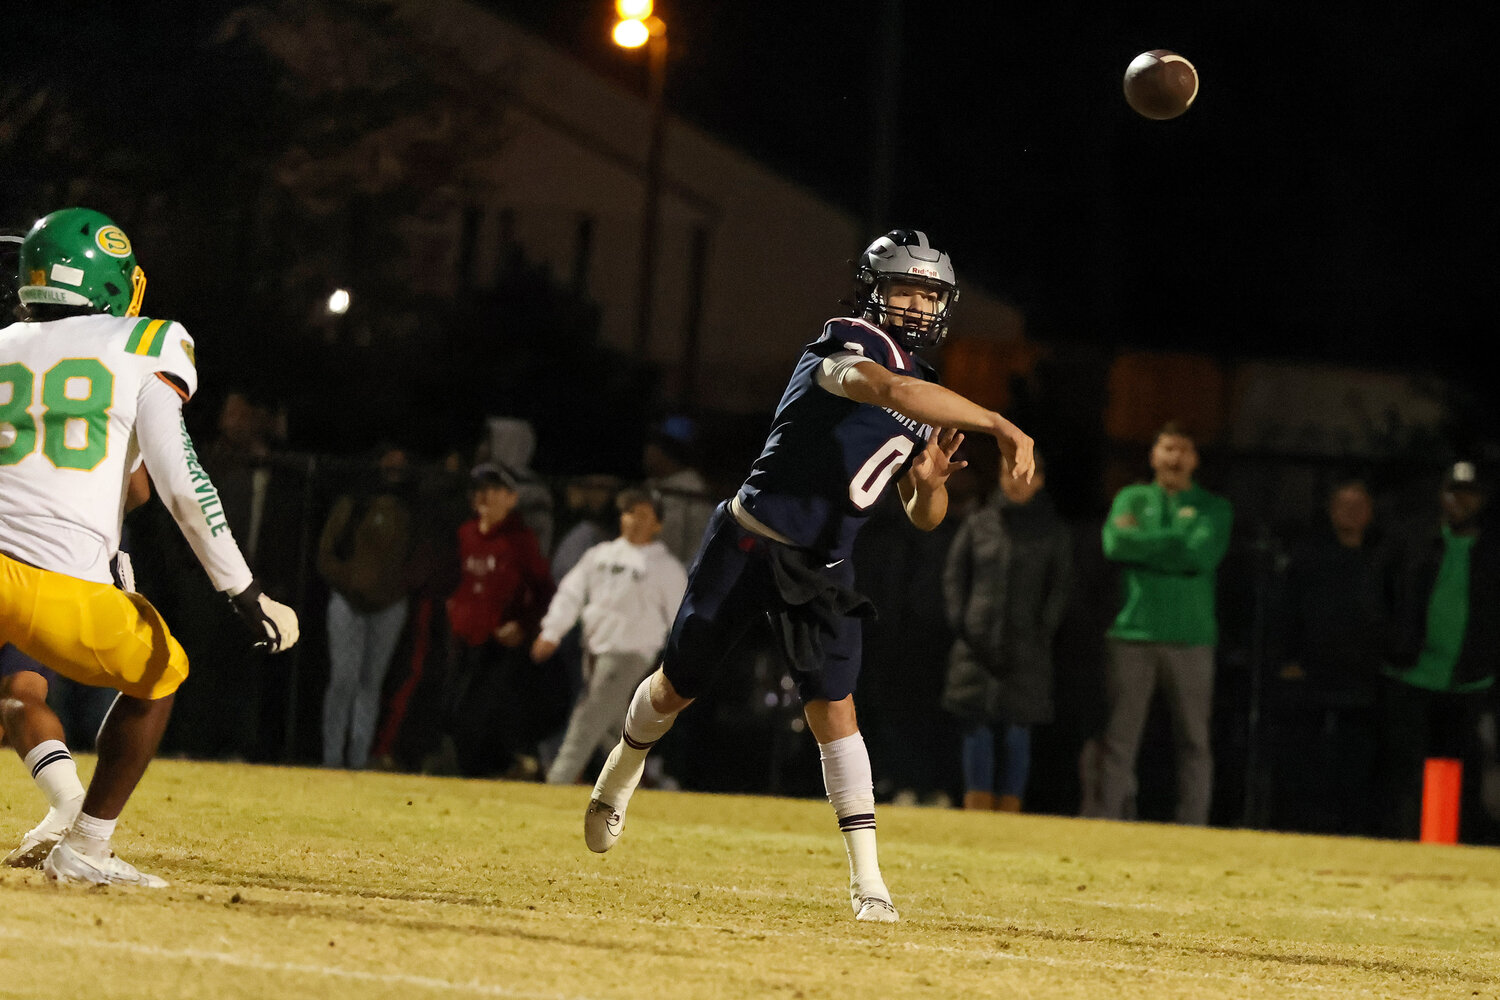 White Knoll dispatched Summerville 21-14 Nov. 24 to move on to the 5A state title game.